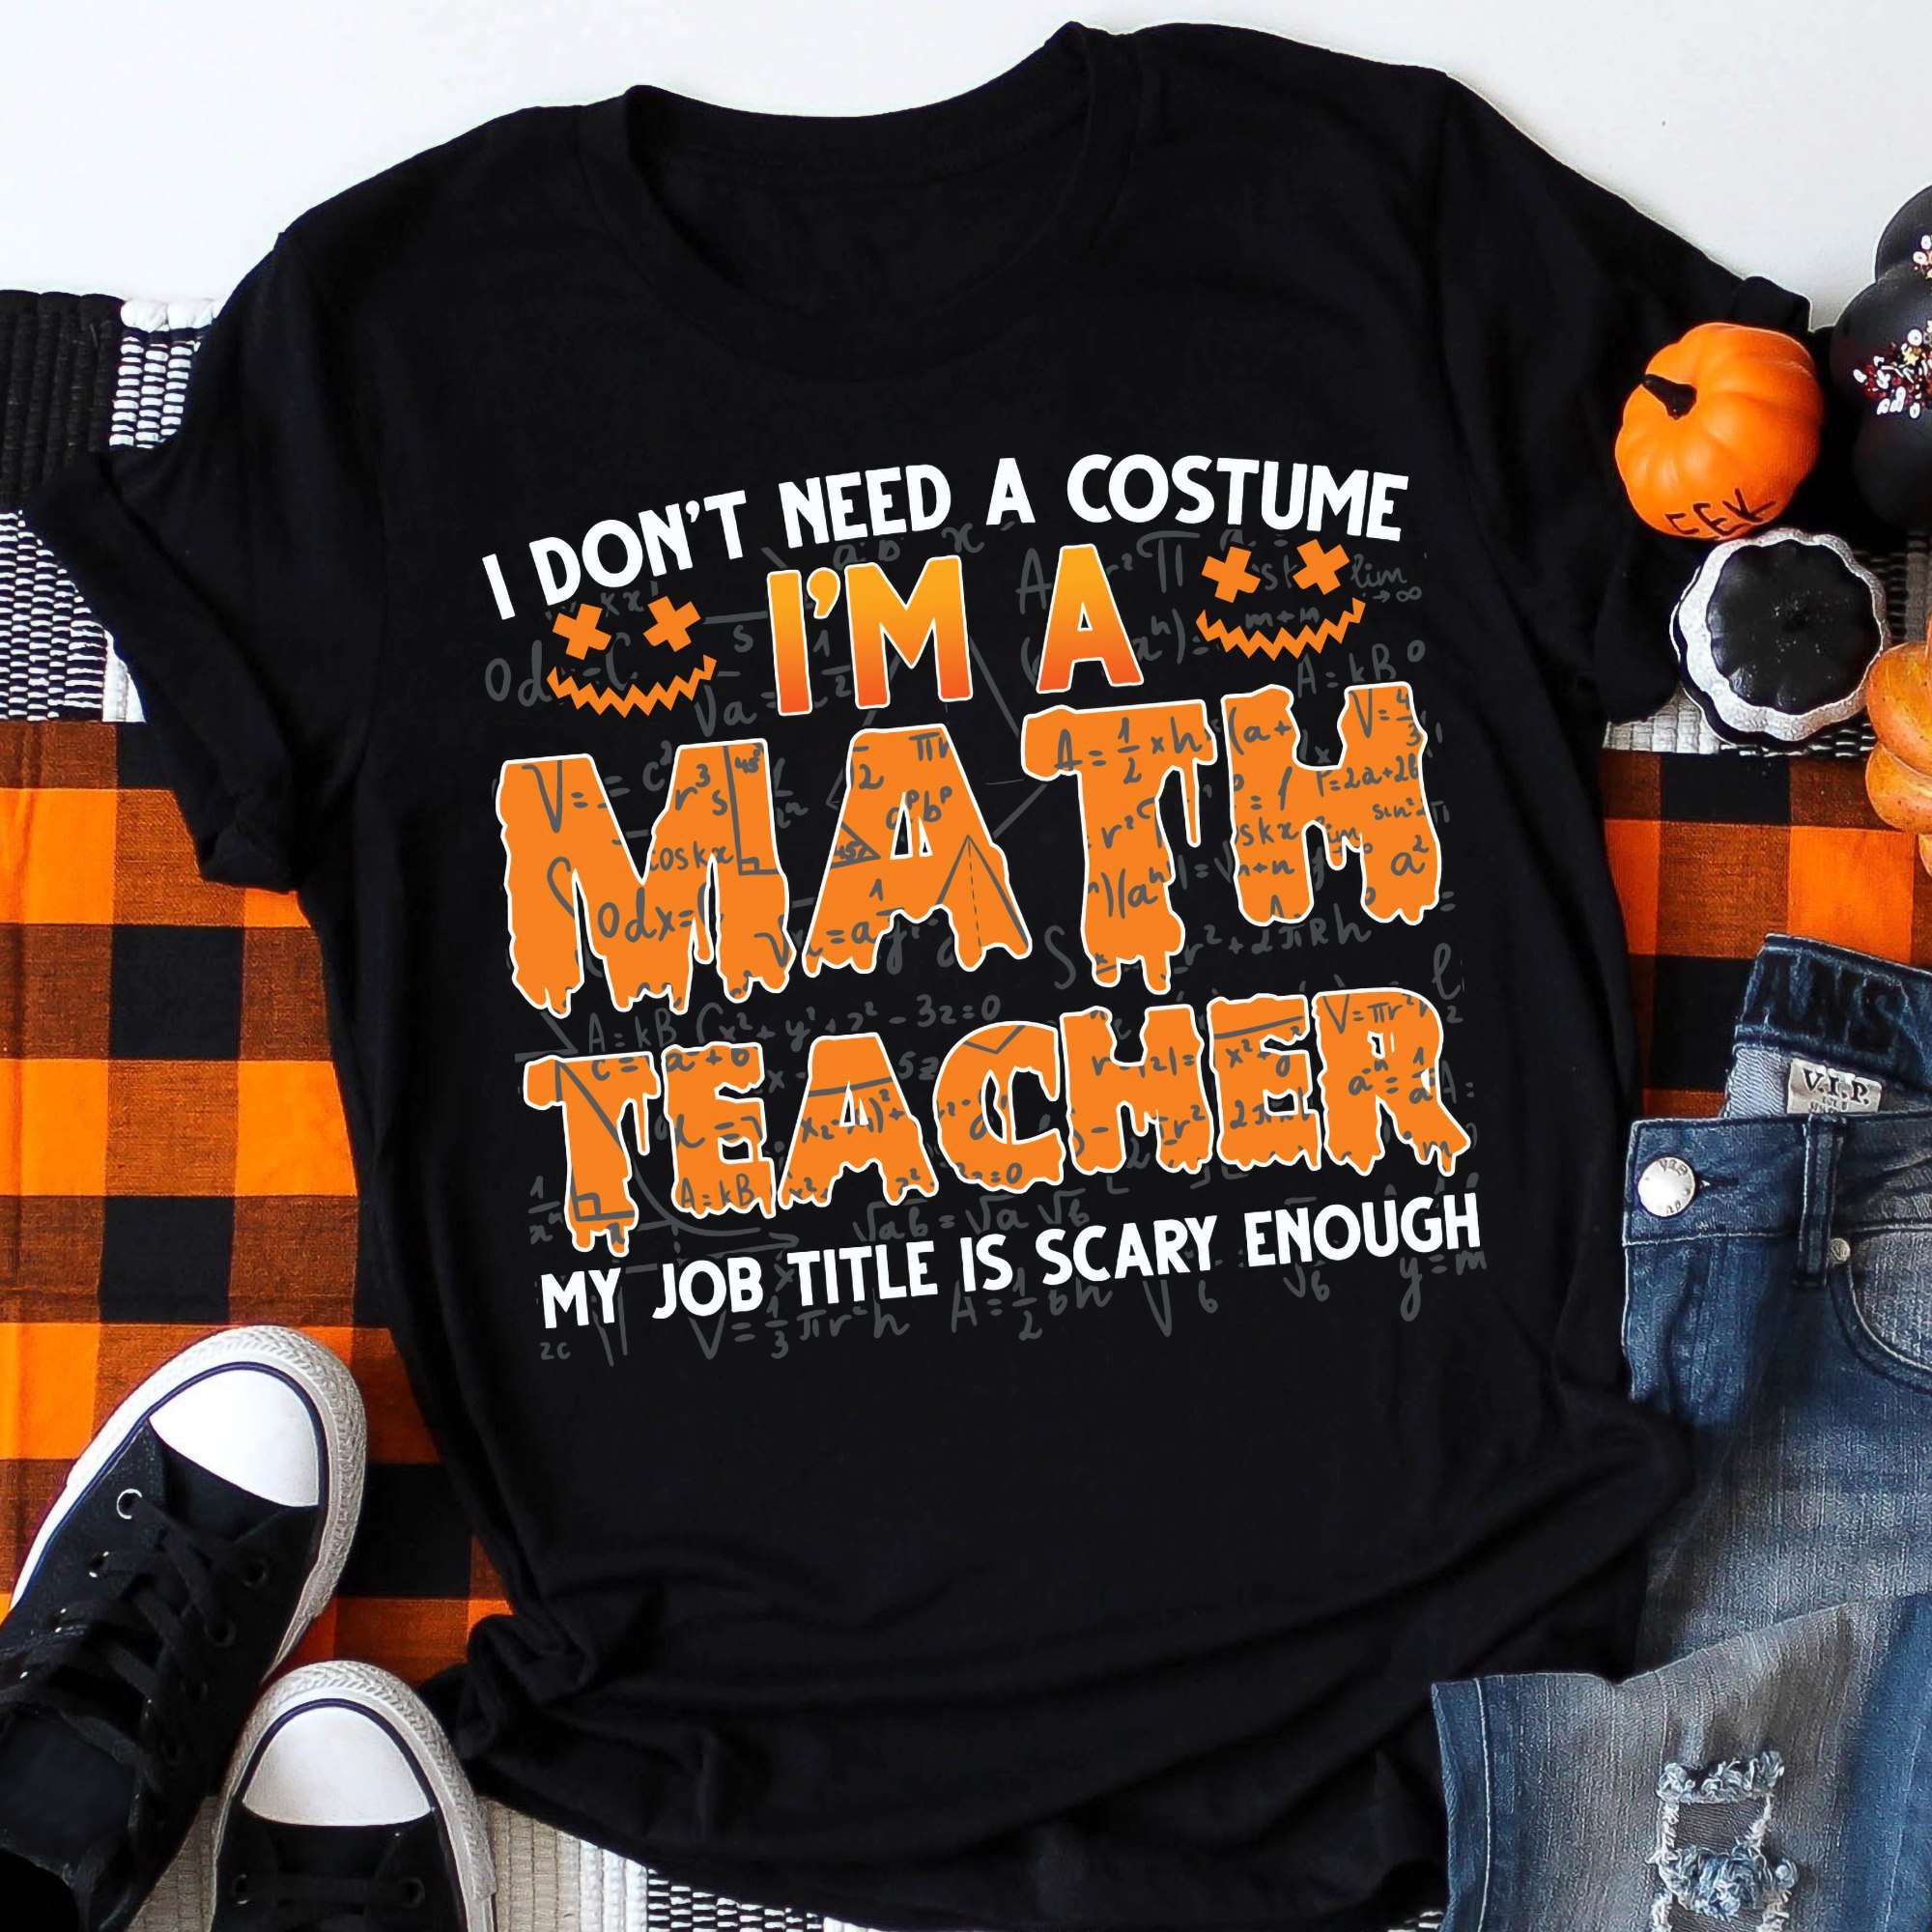 I don't need a costume I'm a math teacher, my job title is scary enough - Halloween math teacher costume, Gift for Halloween